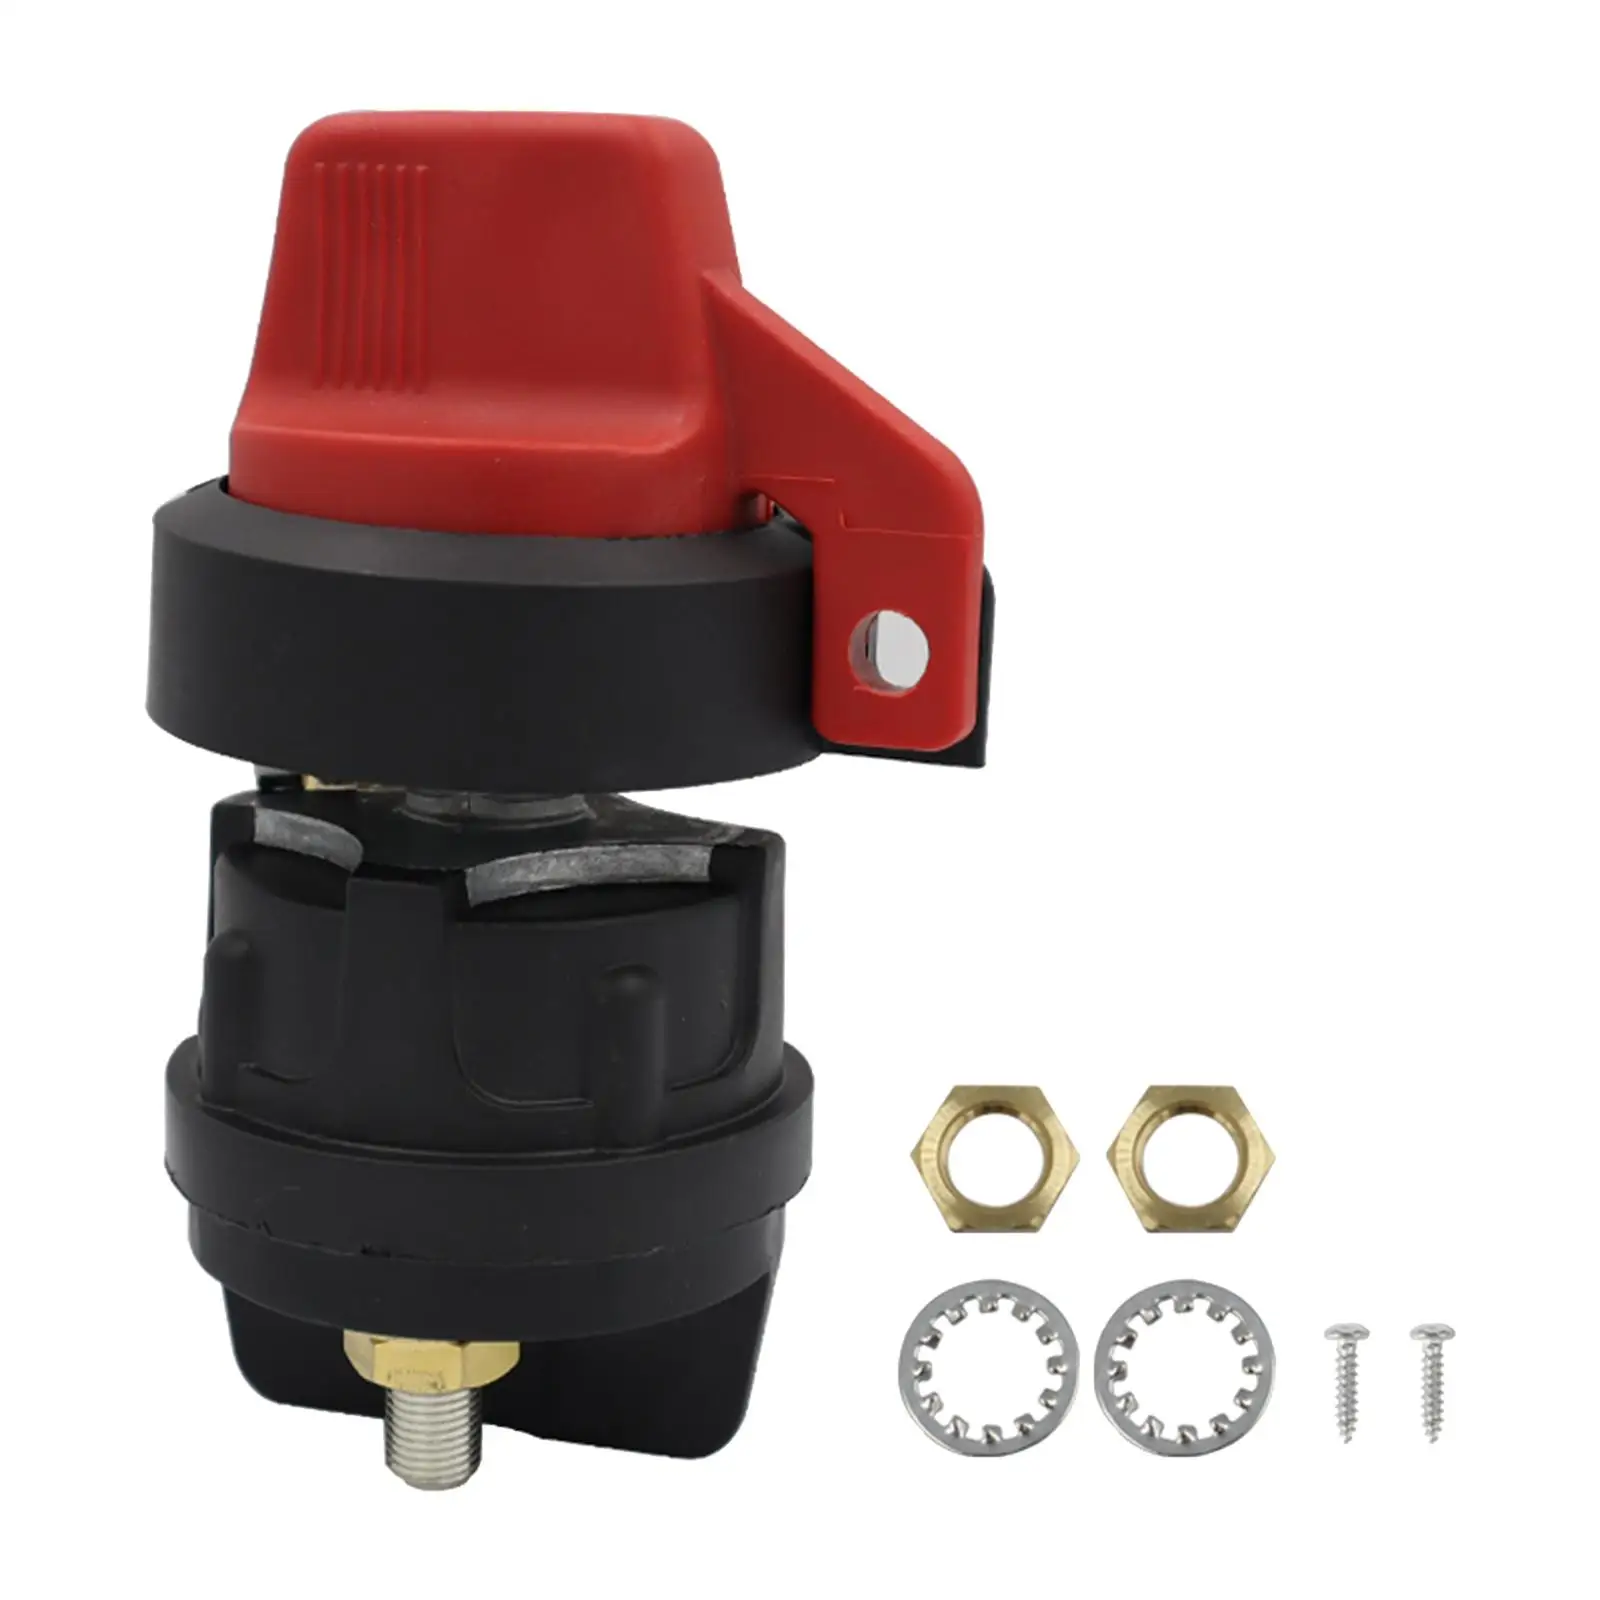 Isolator Lockable Switch 75920 Spst On/Off ,Built-In Security Locking for Vehicles Easy to Install Durable Replaces Accessories